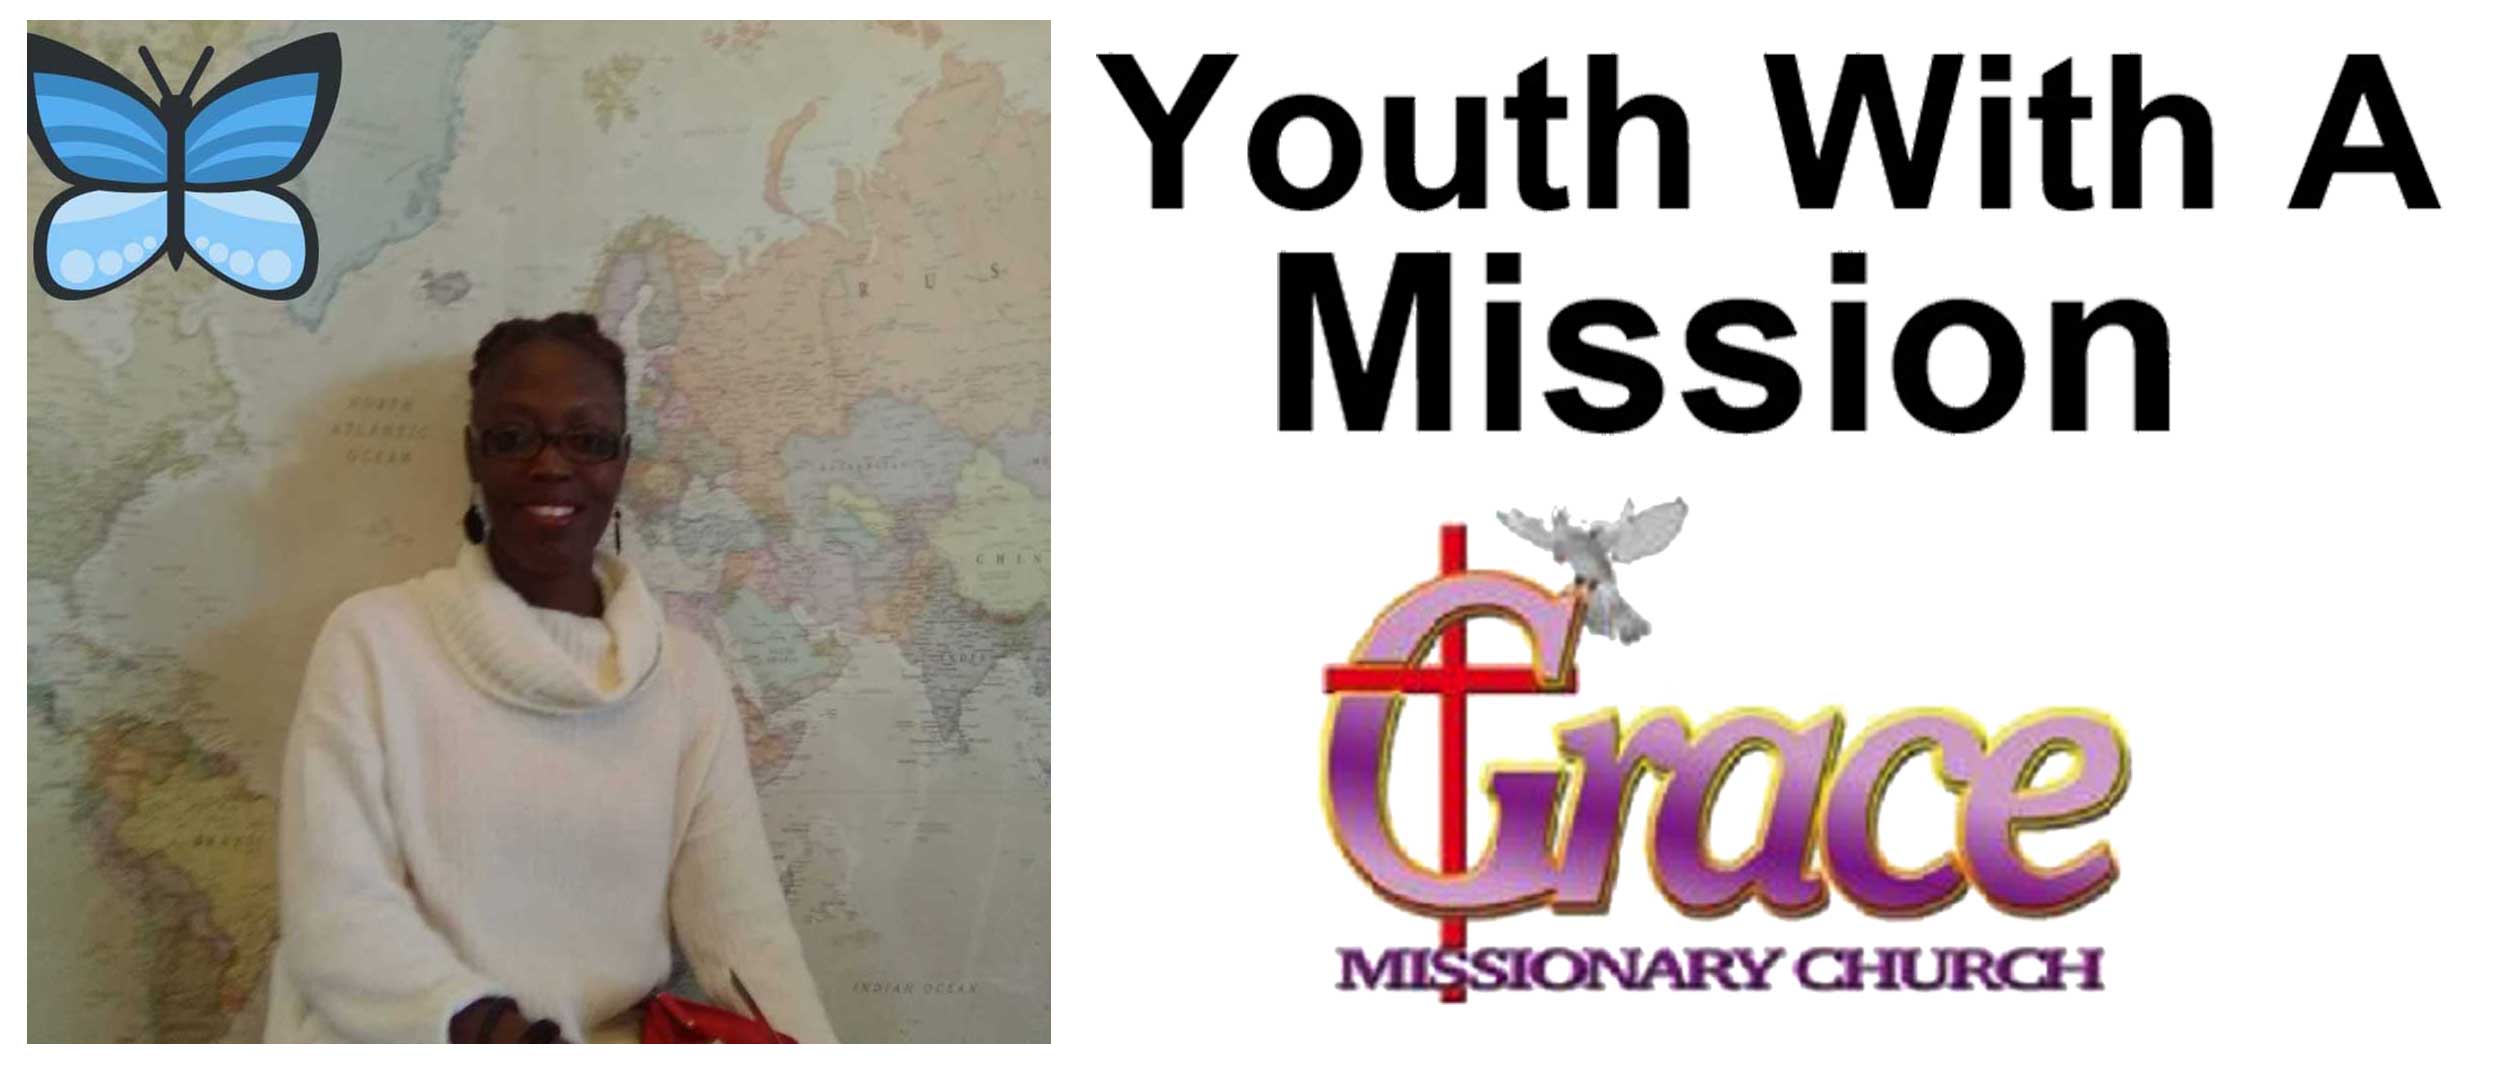 YWAM, Youth With A Mission